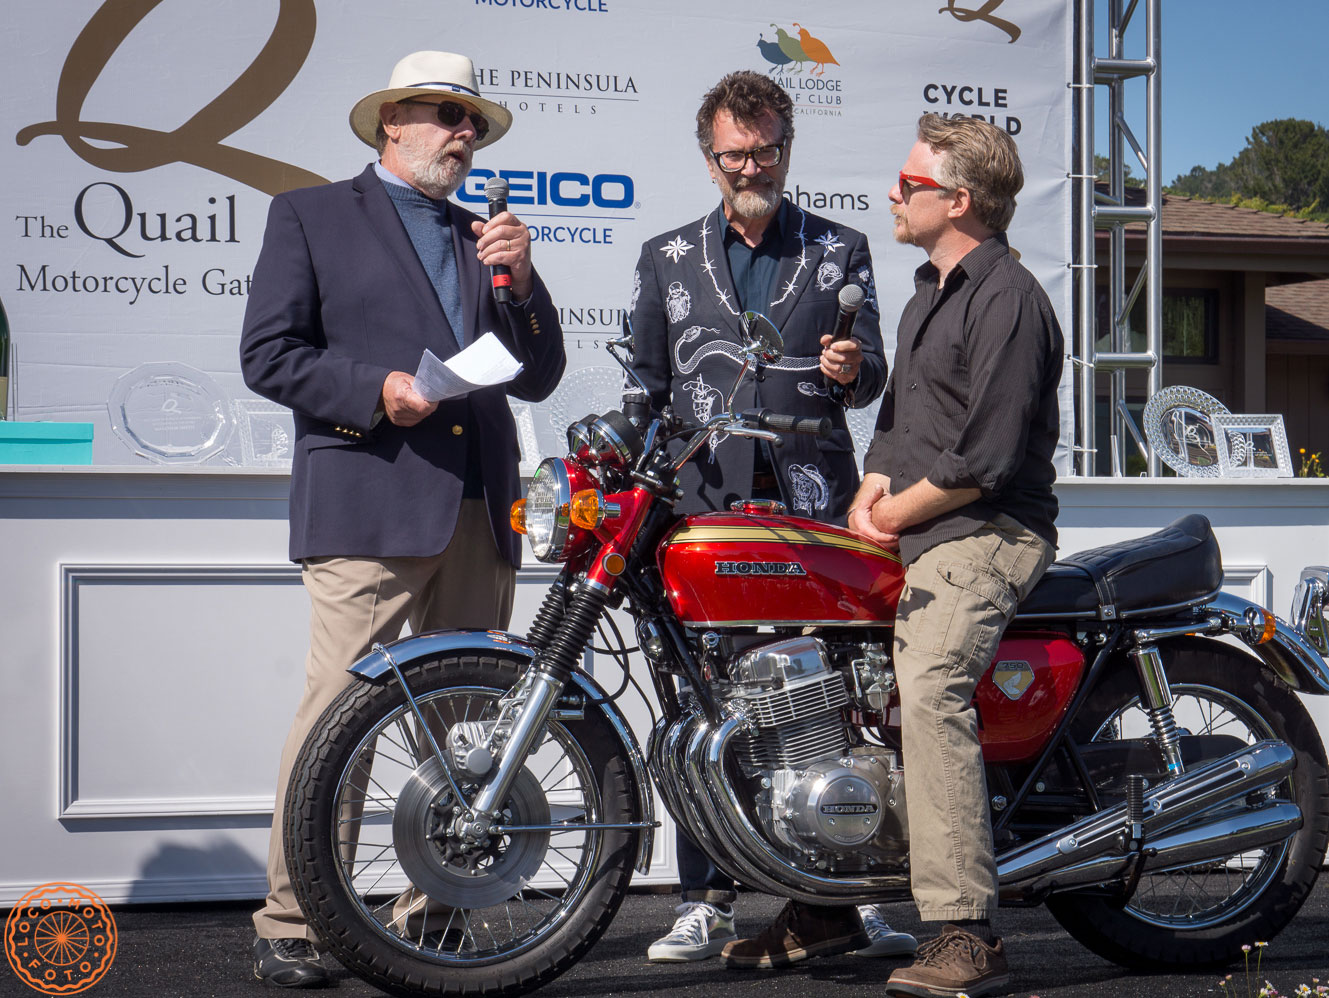 Receiving the Best of Show Award at teh 2019 Quail Motorcycle Gathering